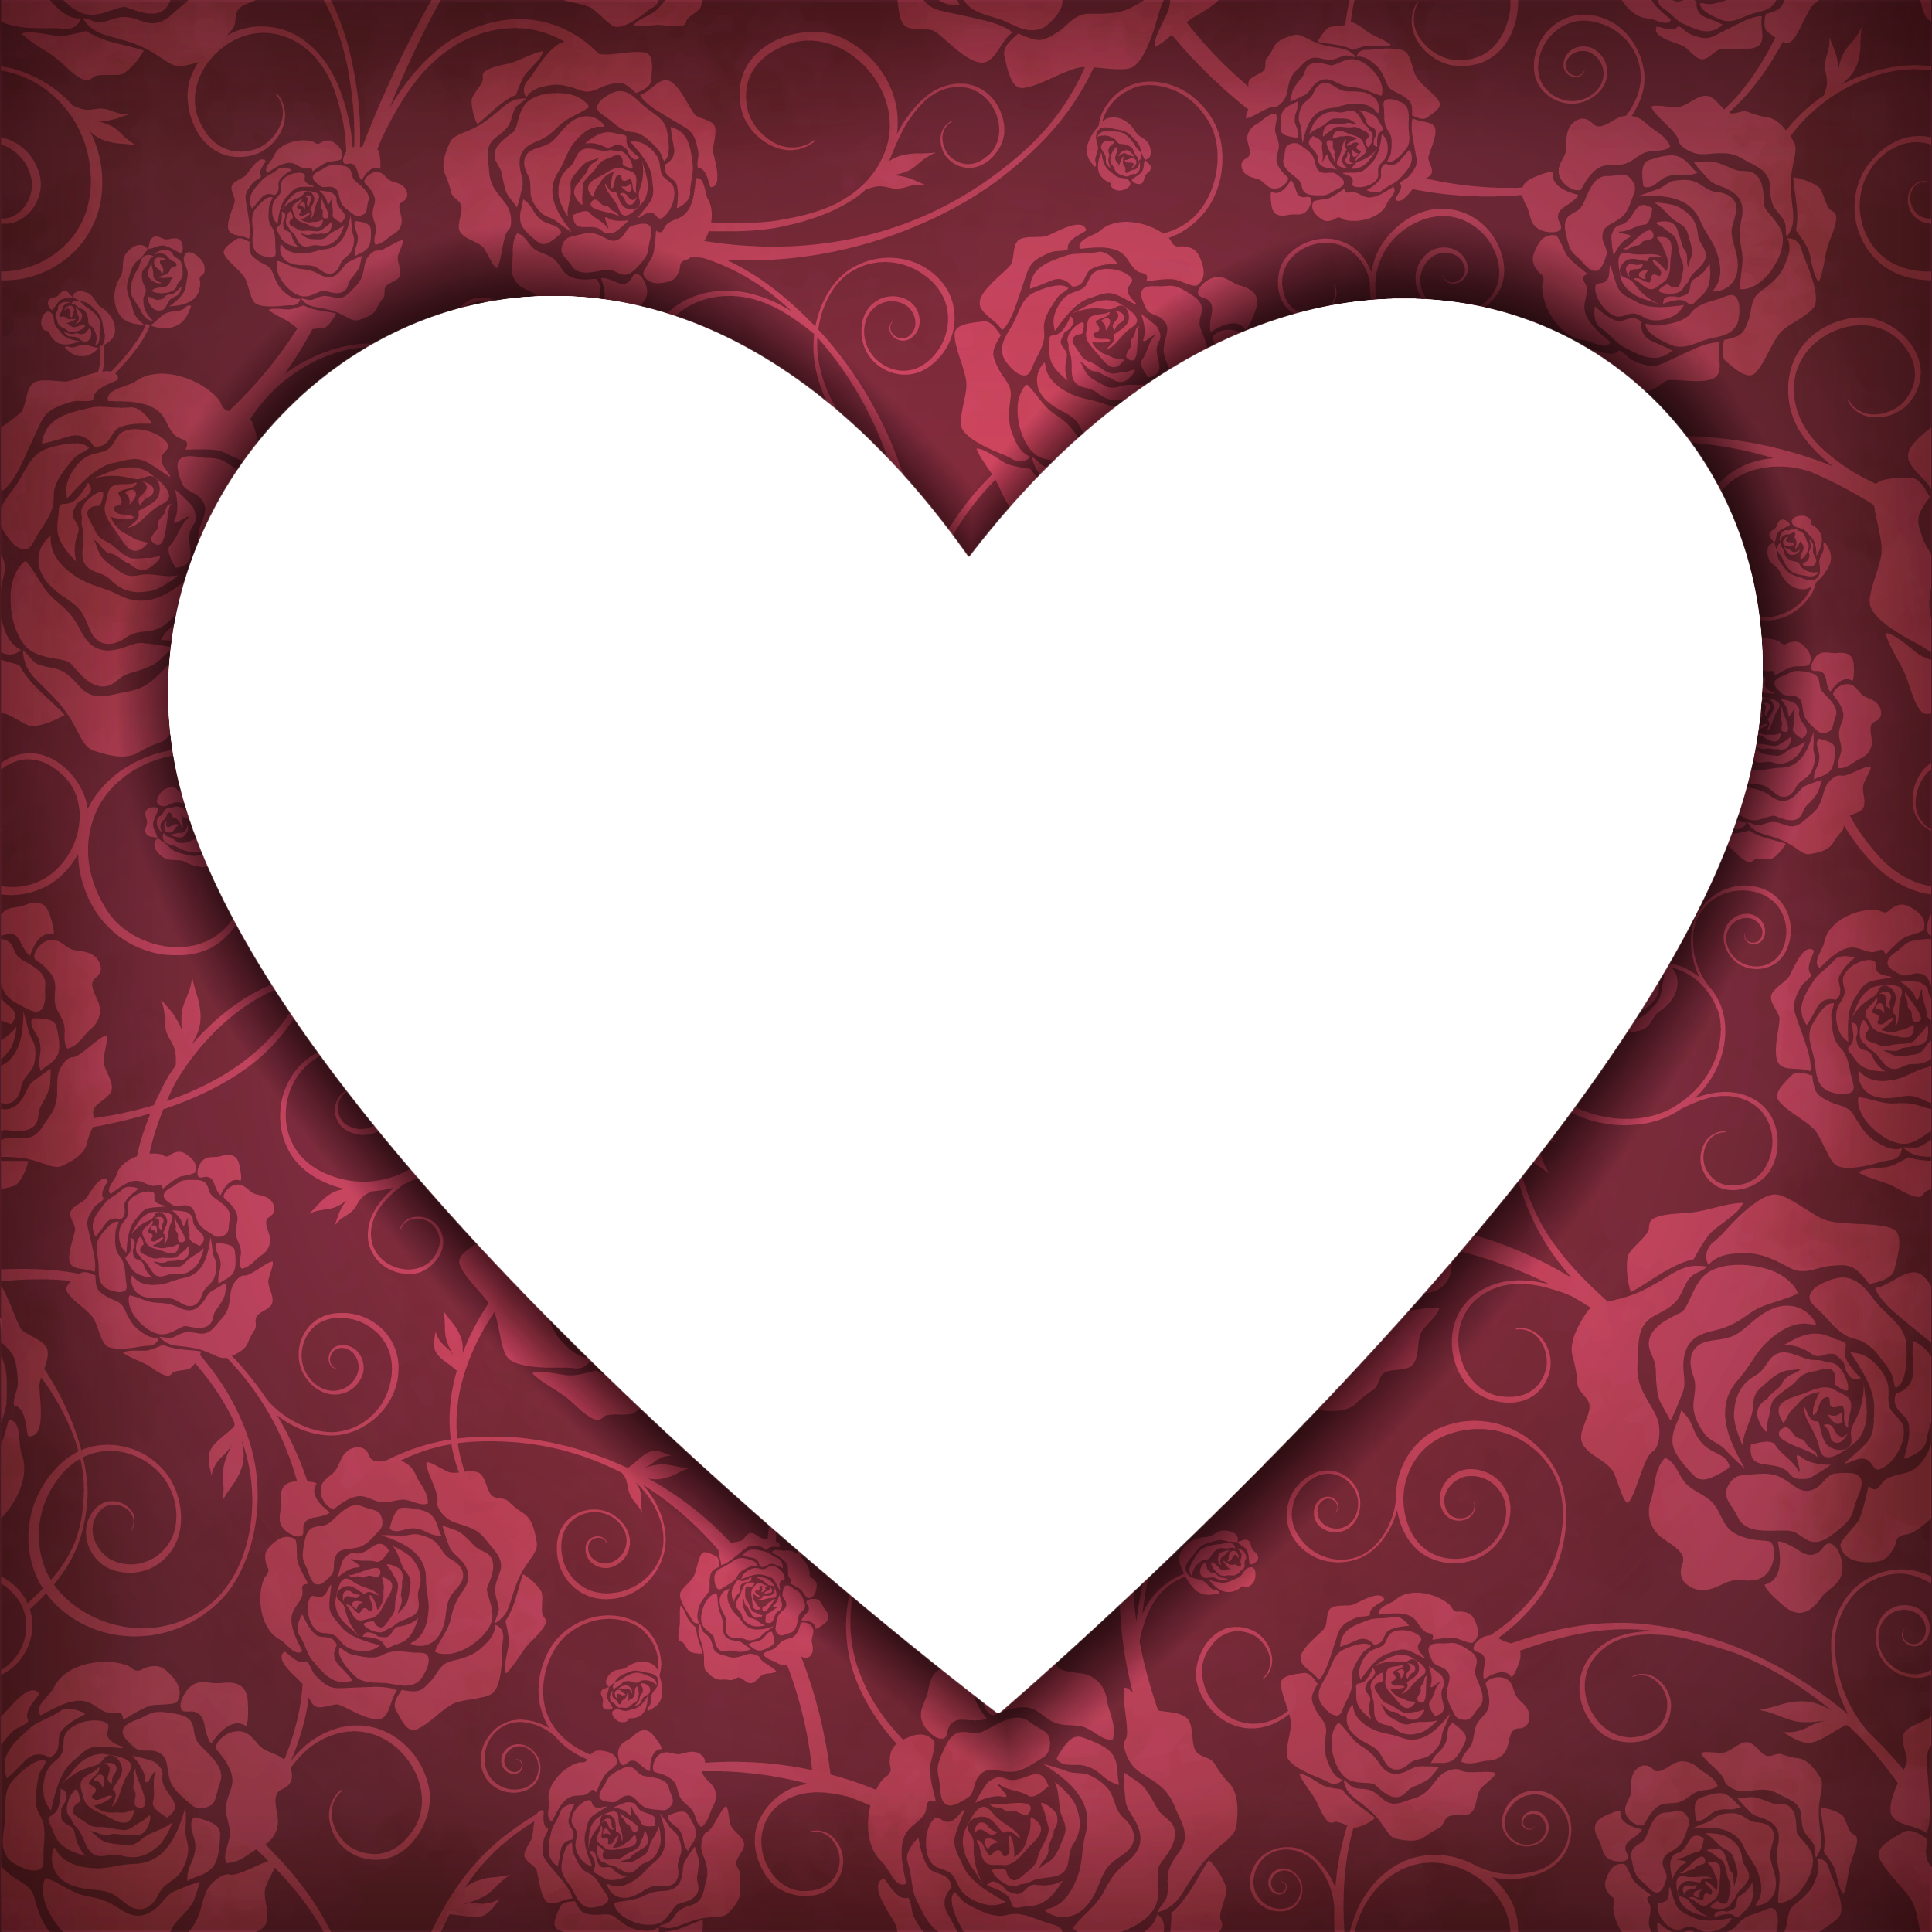 Heart Frame - Large collections of hd transparent heart frame png